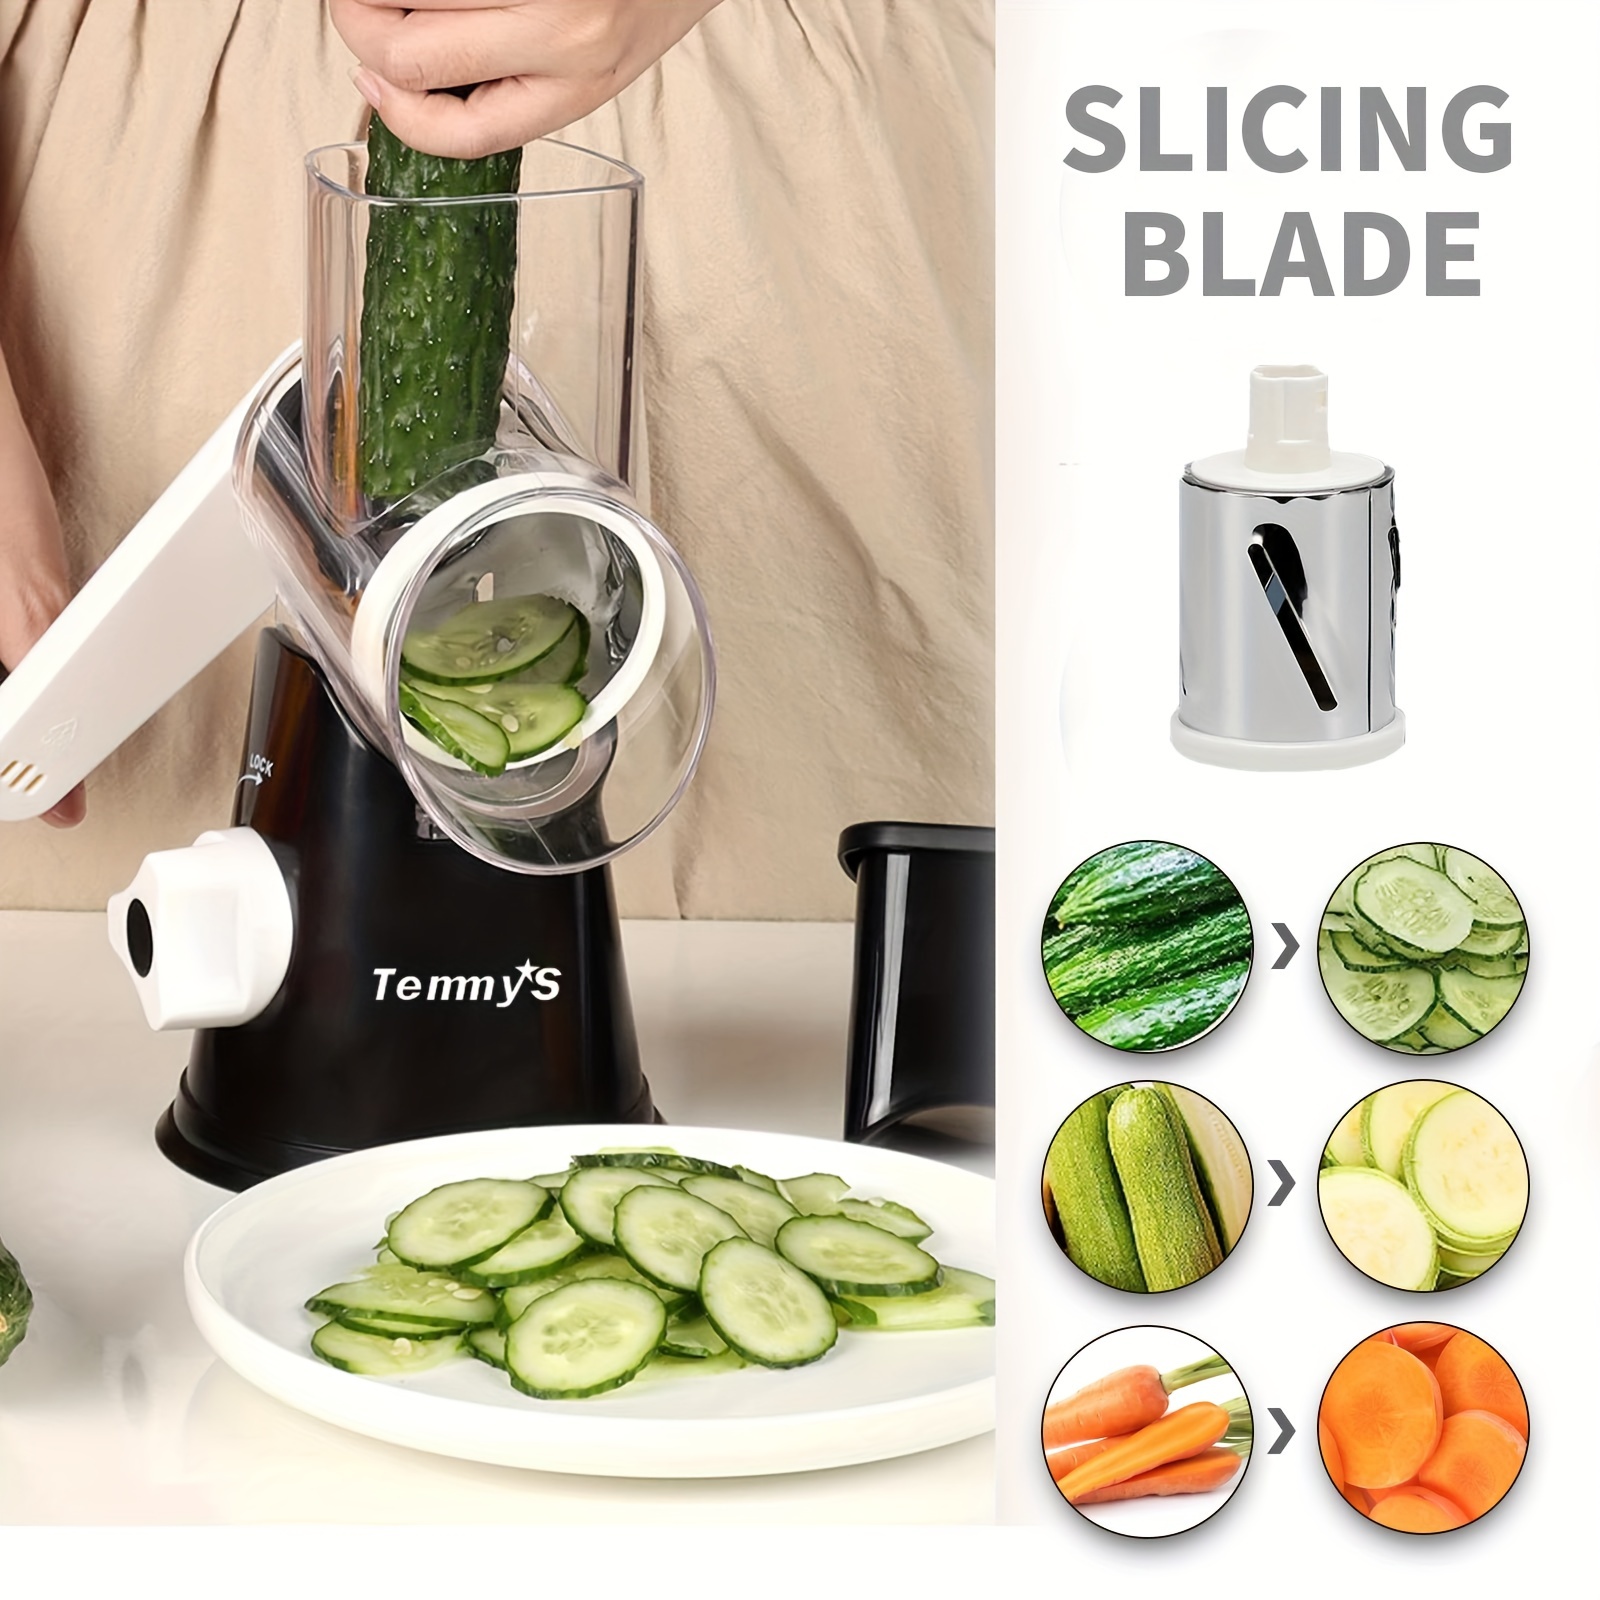 Rotary Grater Cheese Shredder, Round Drum Vegetable Slicer Cutter, Hand  Crank Cutter for Walnuts, Potato, Salad, Nut 